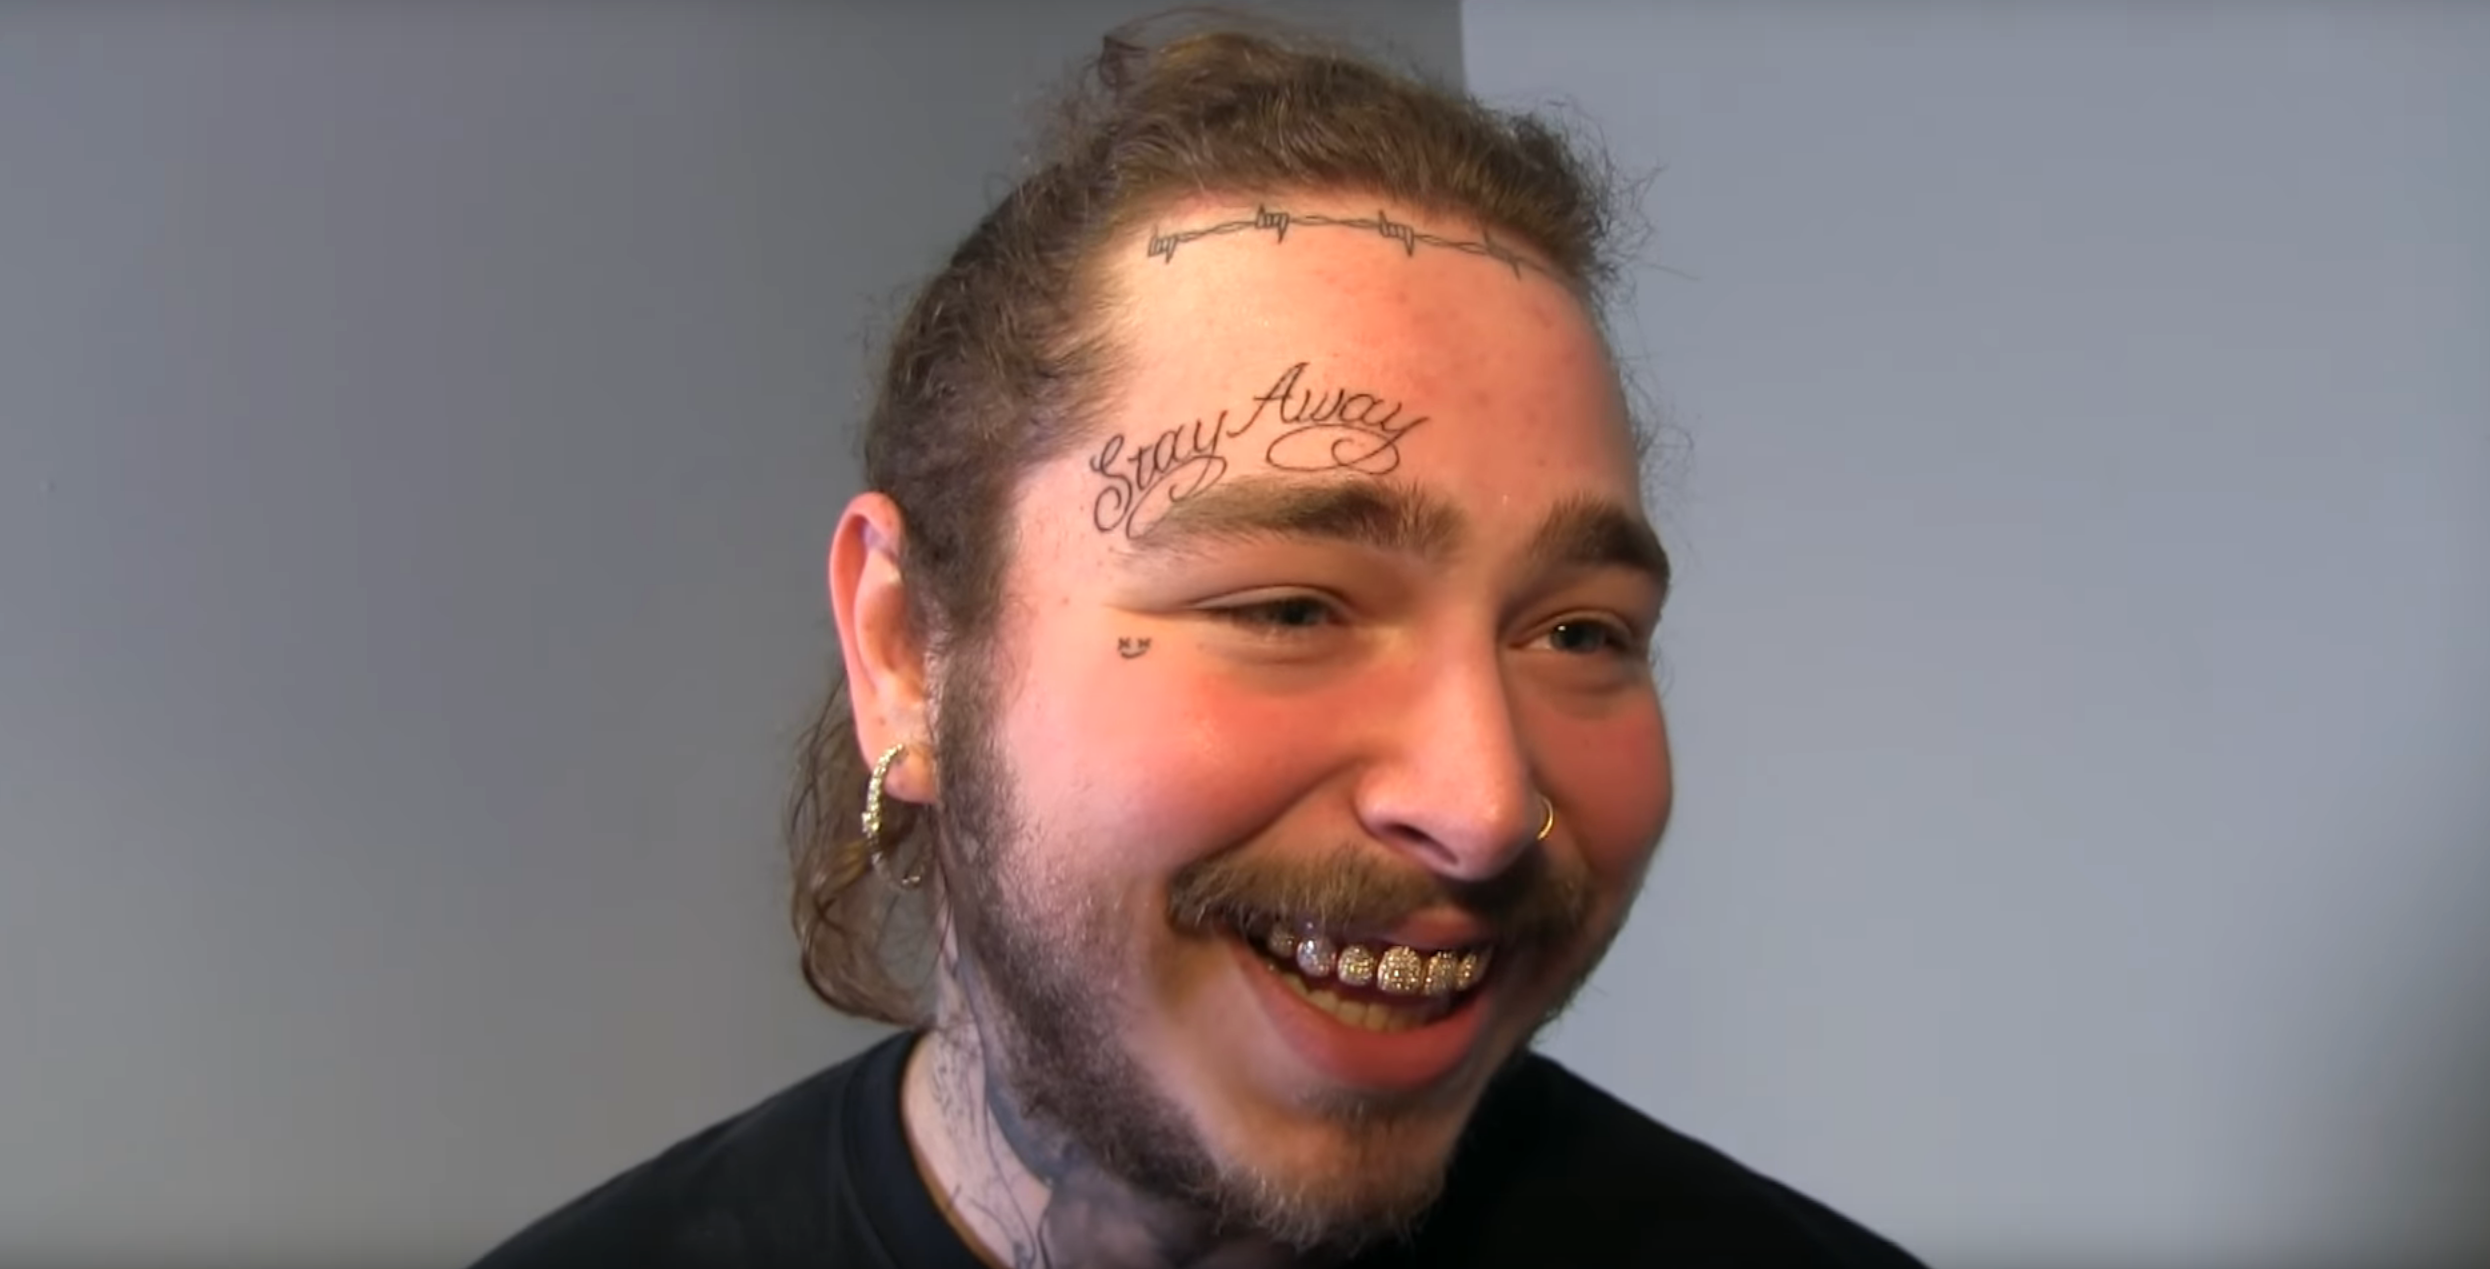 why are face tattoos becoming popular